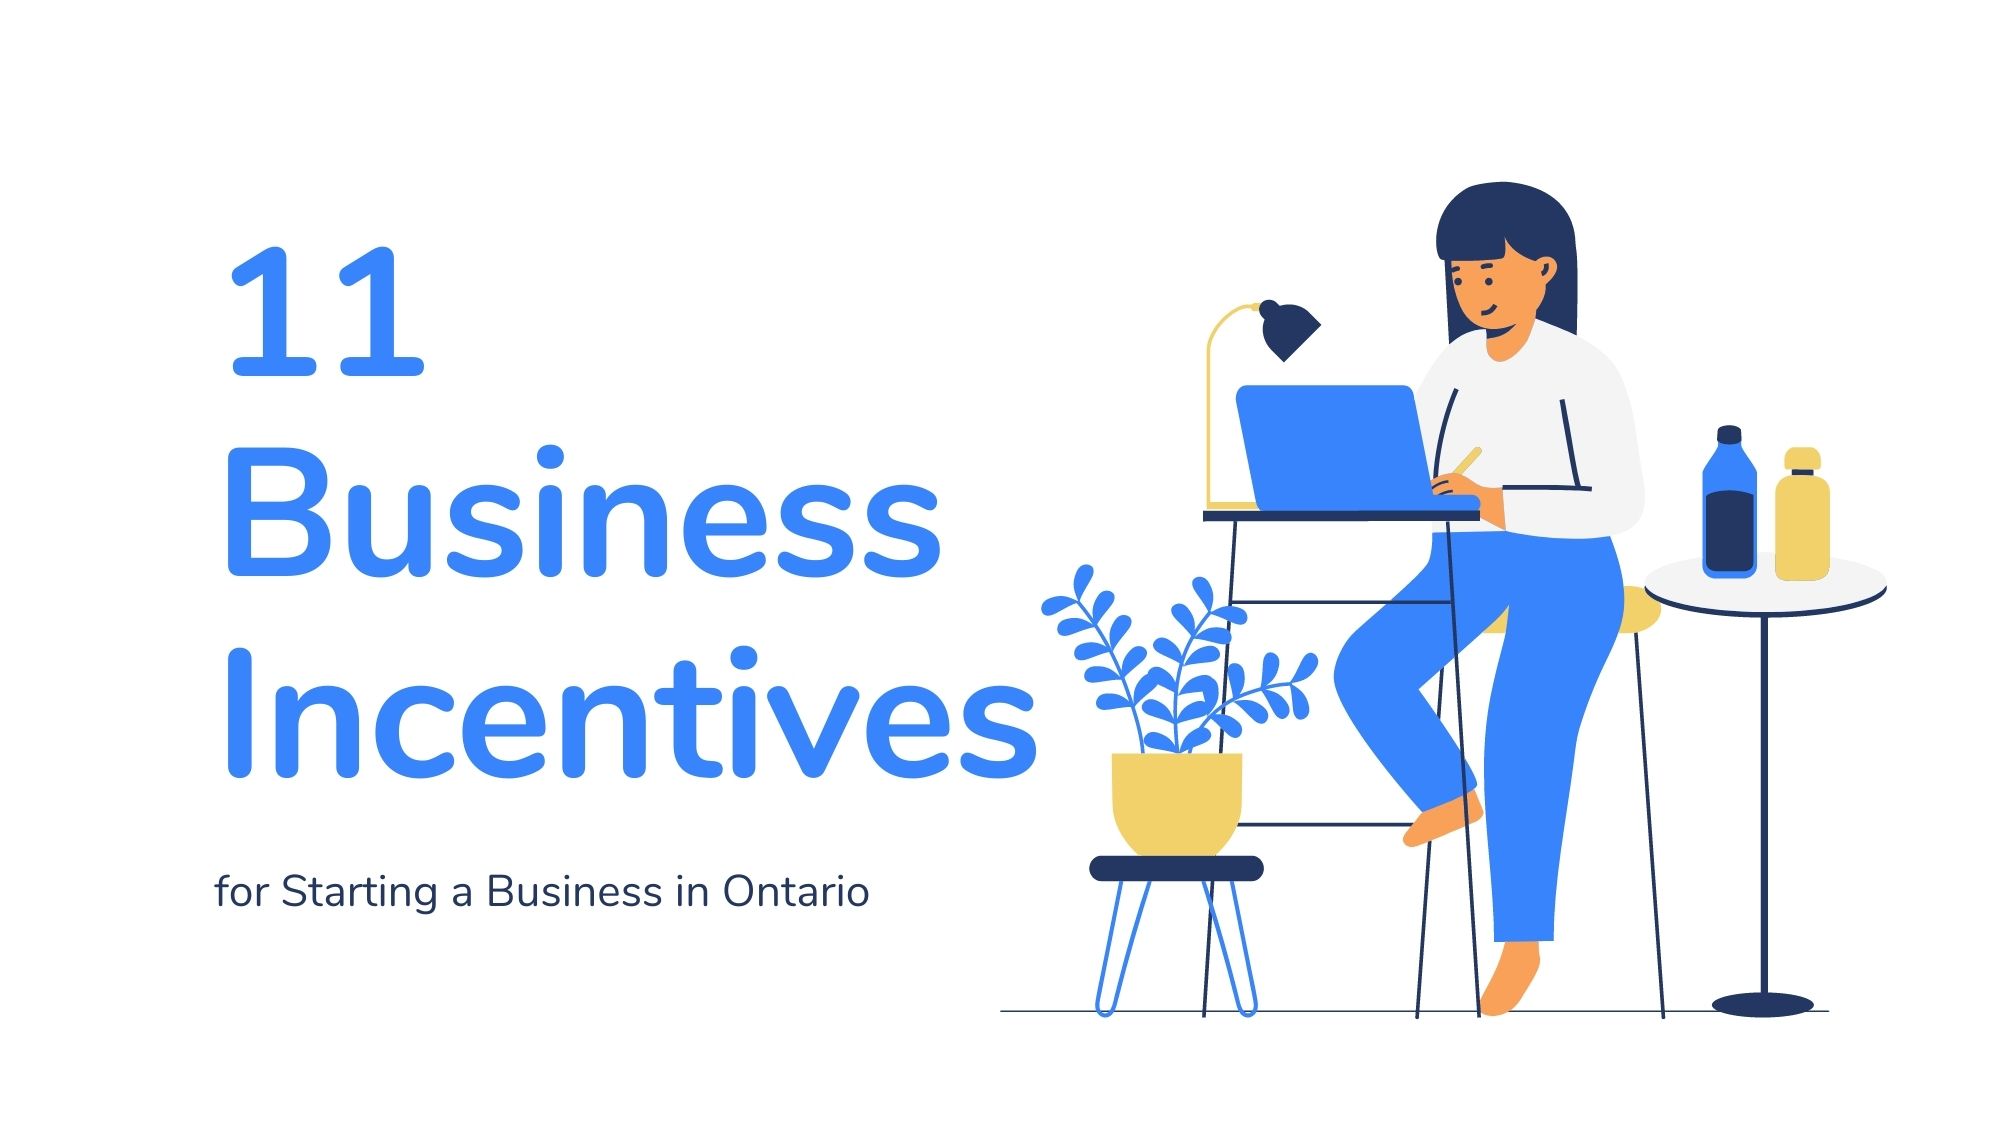 11 Business Incentives for Starting a Business in Ontario